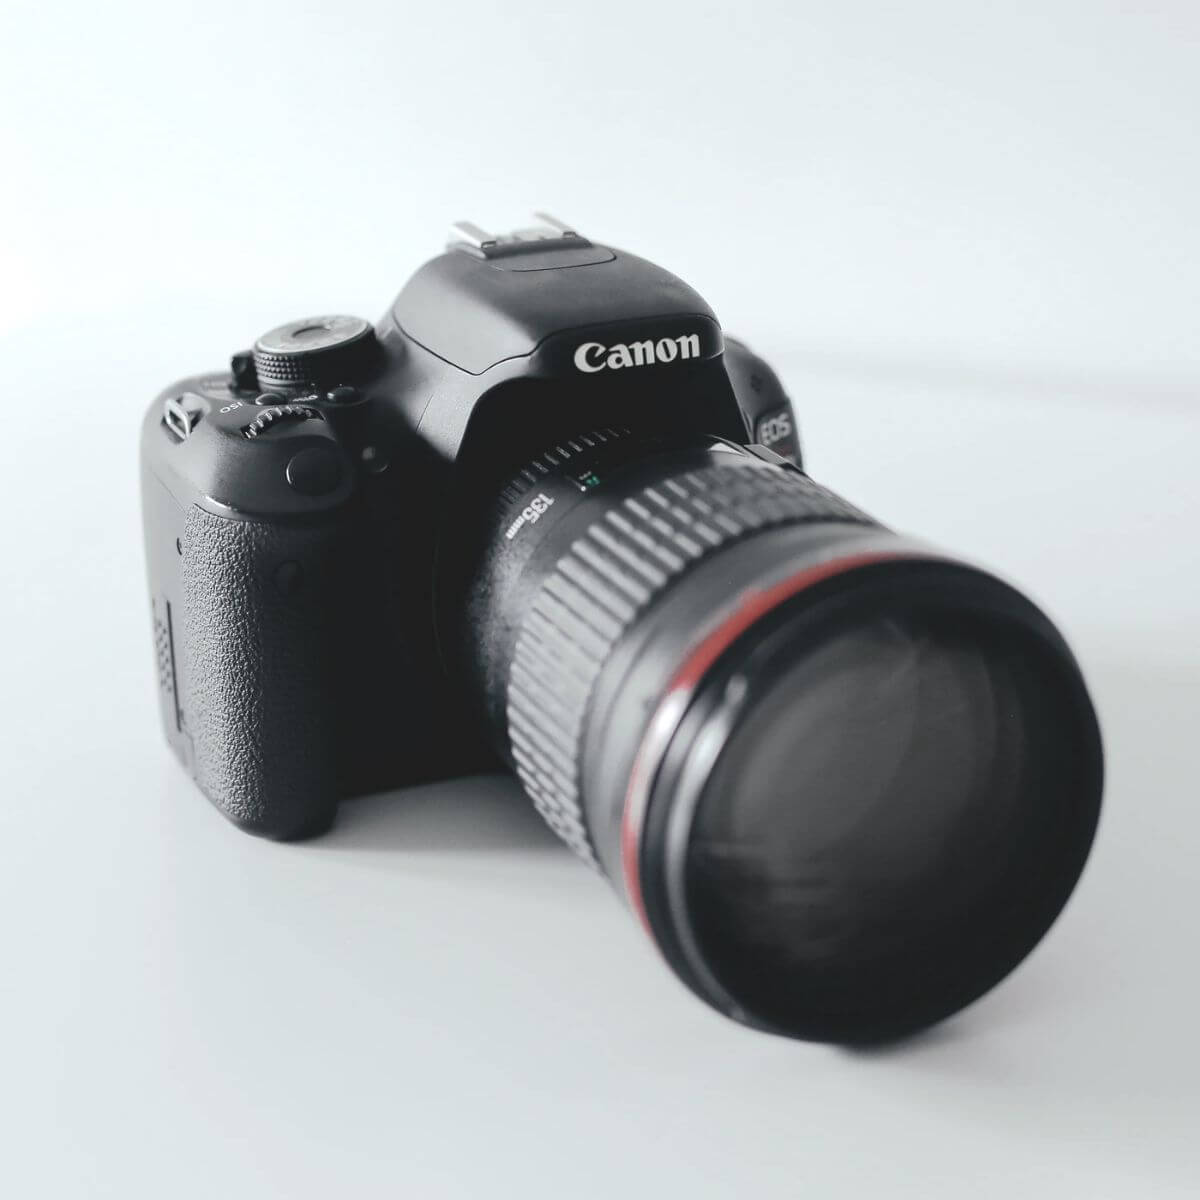 Canon camera on a white table.